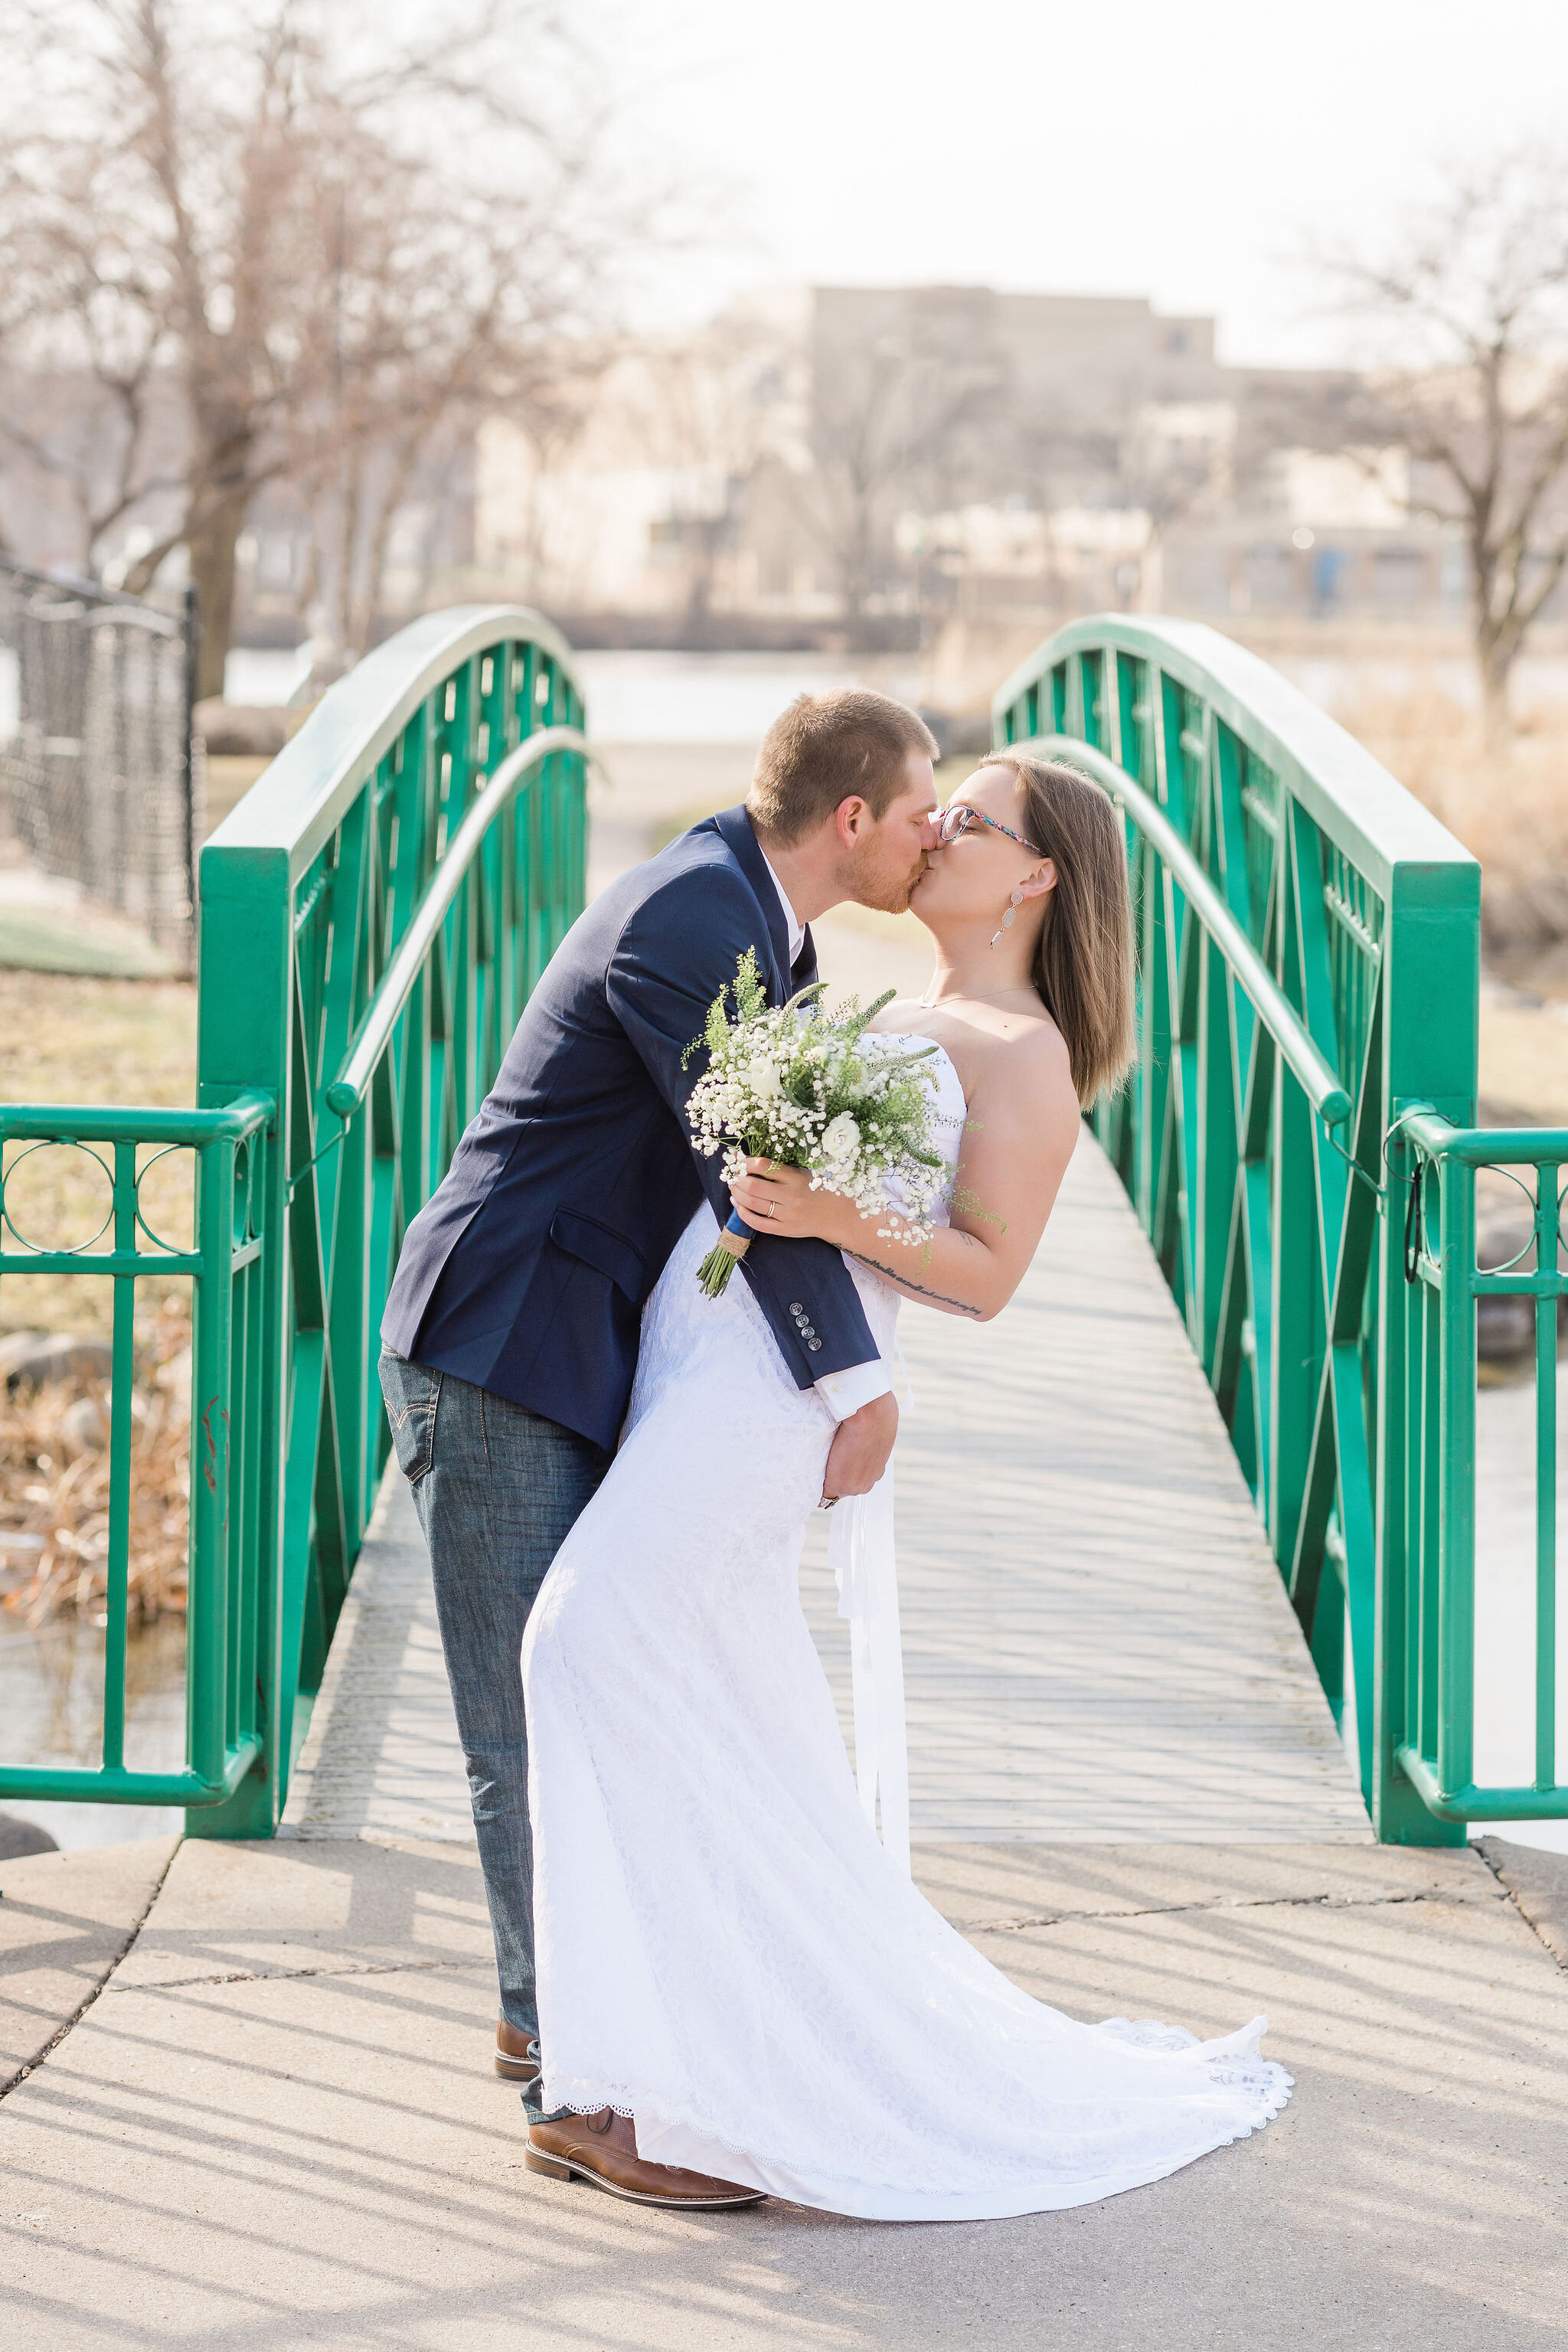 Bride and groom kissing in front of a bridge